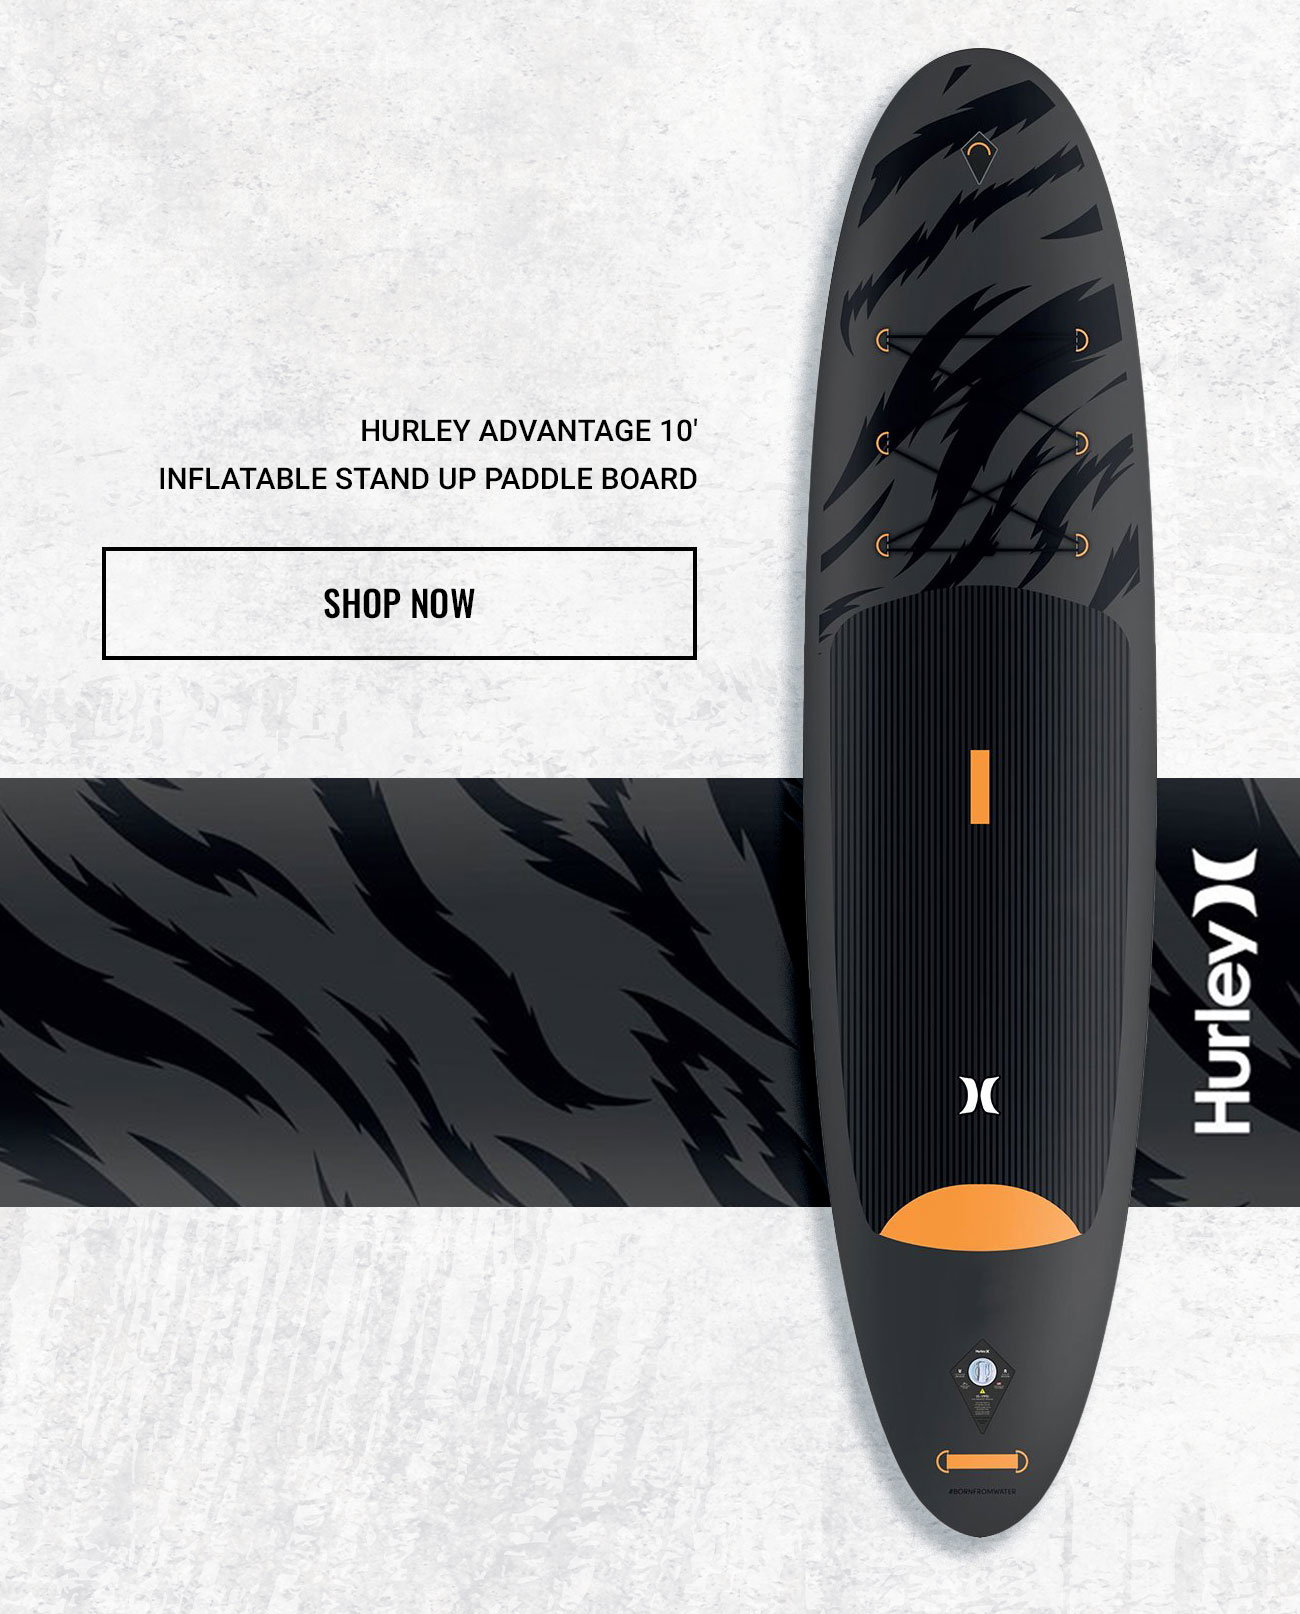 Paddle out with the Hurley Super Surfer Game, now available for download ⚡️  - Hurley